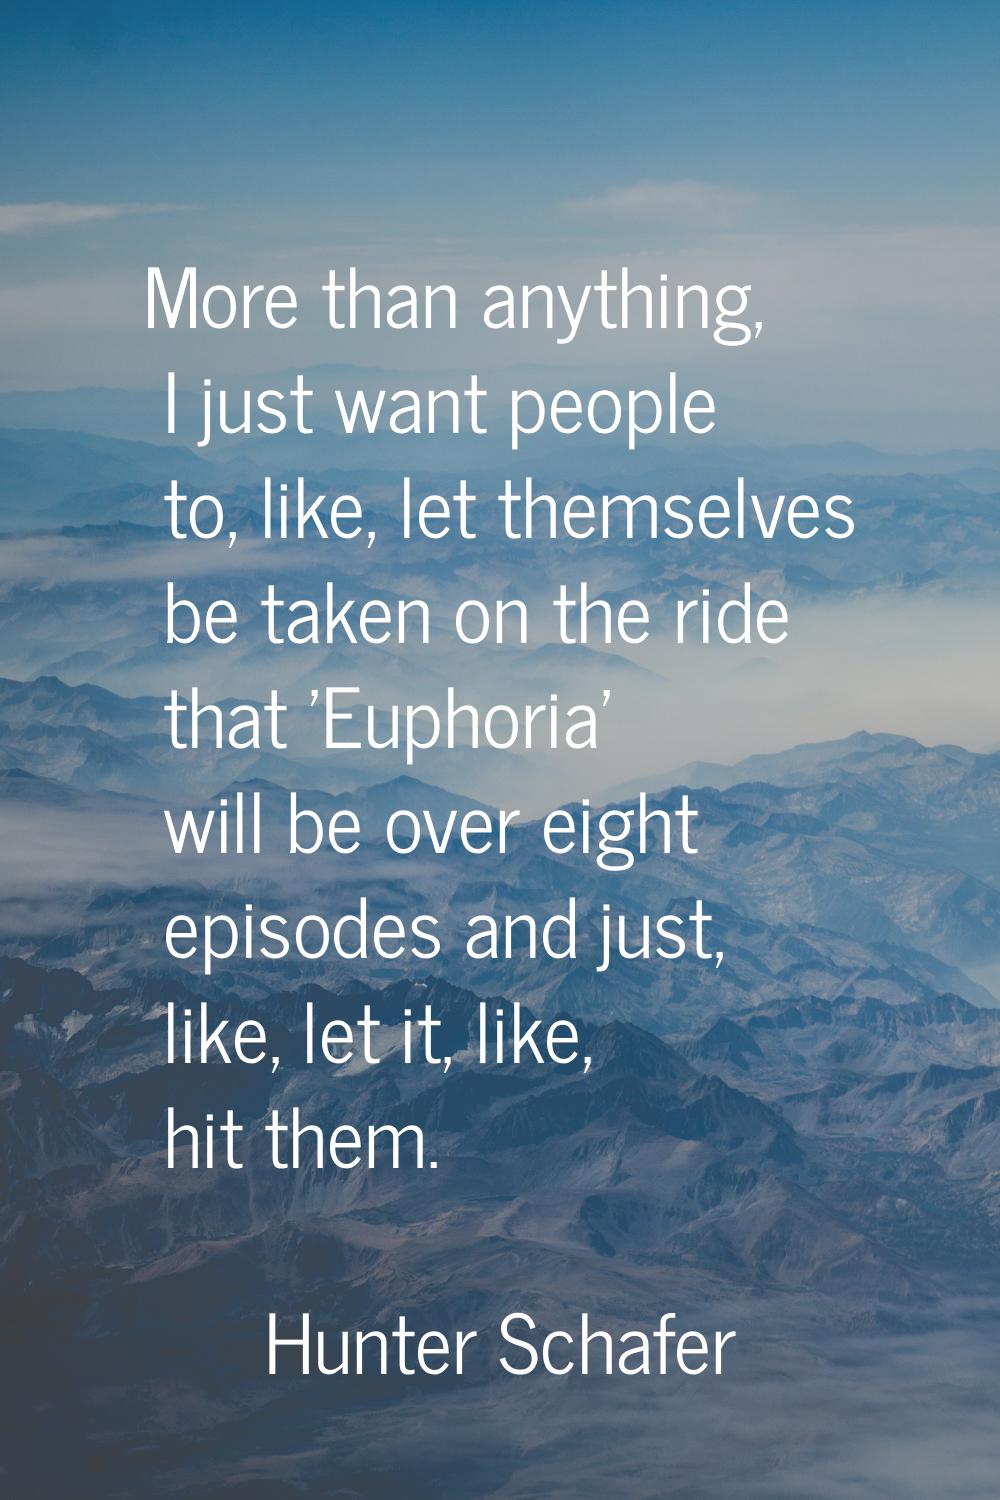 More than anything, I just want people to, like, let themselves be taken on the ride that 'Euphoria